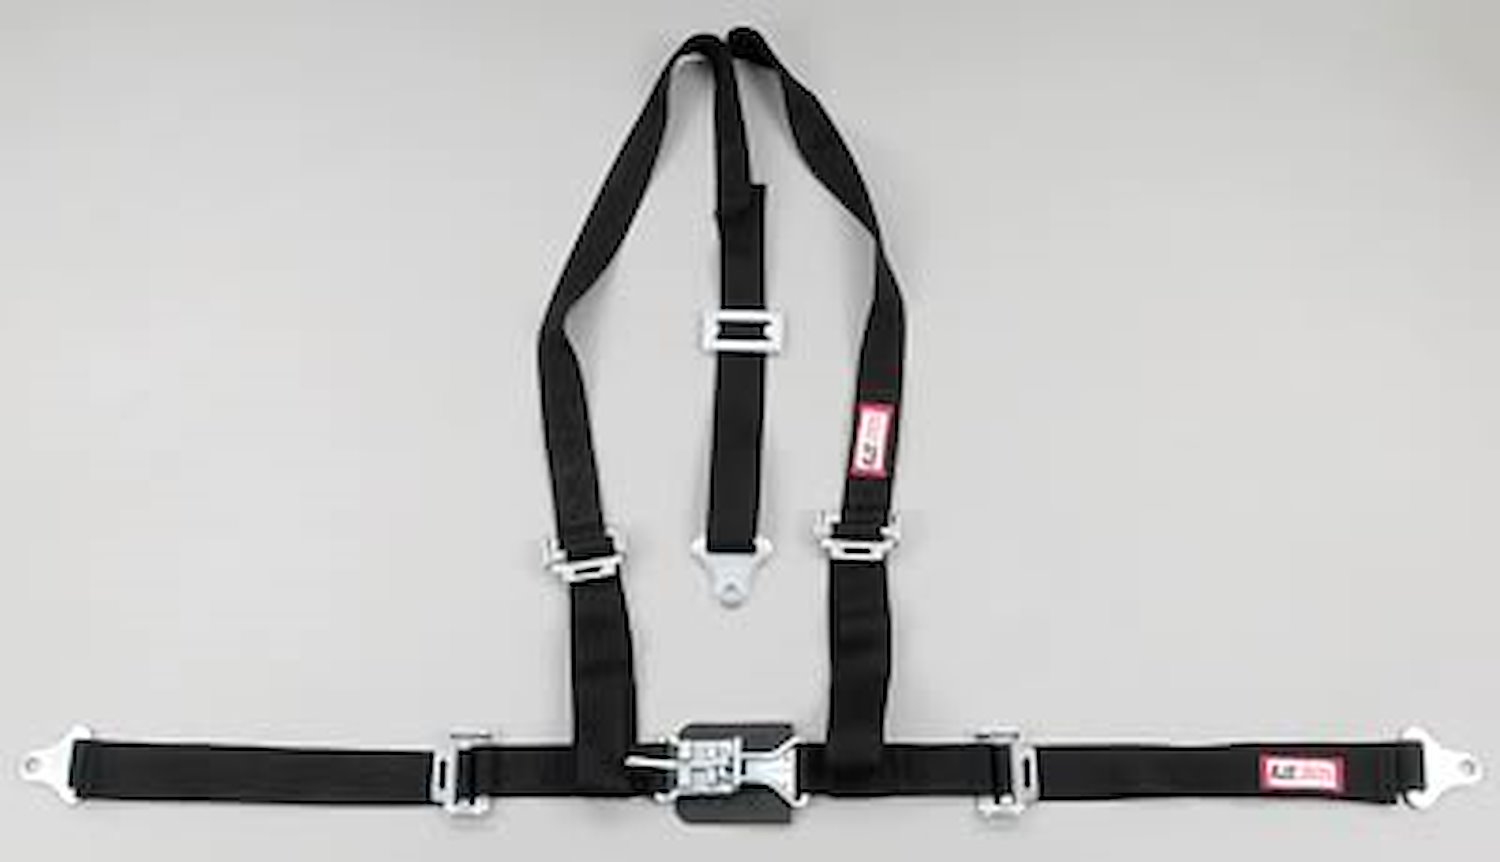 NON-SFI L&L HARNESS 3 PULL DOWN Lap BELT SEWN IN 2 S.H. Y FLOOR Mount ALL WRAP ENDS PURPLE